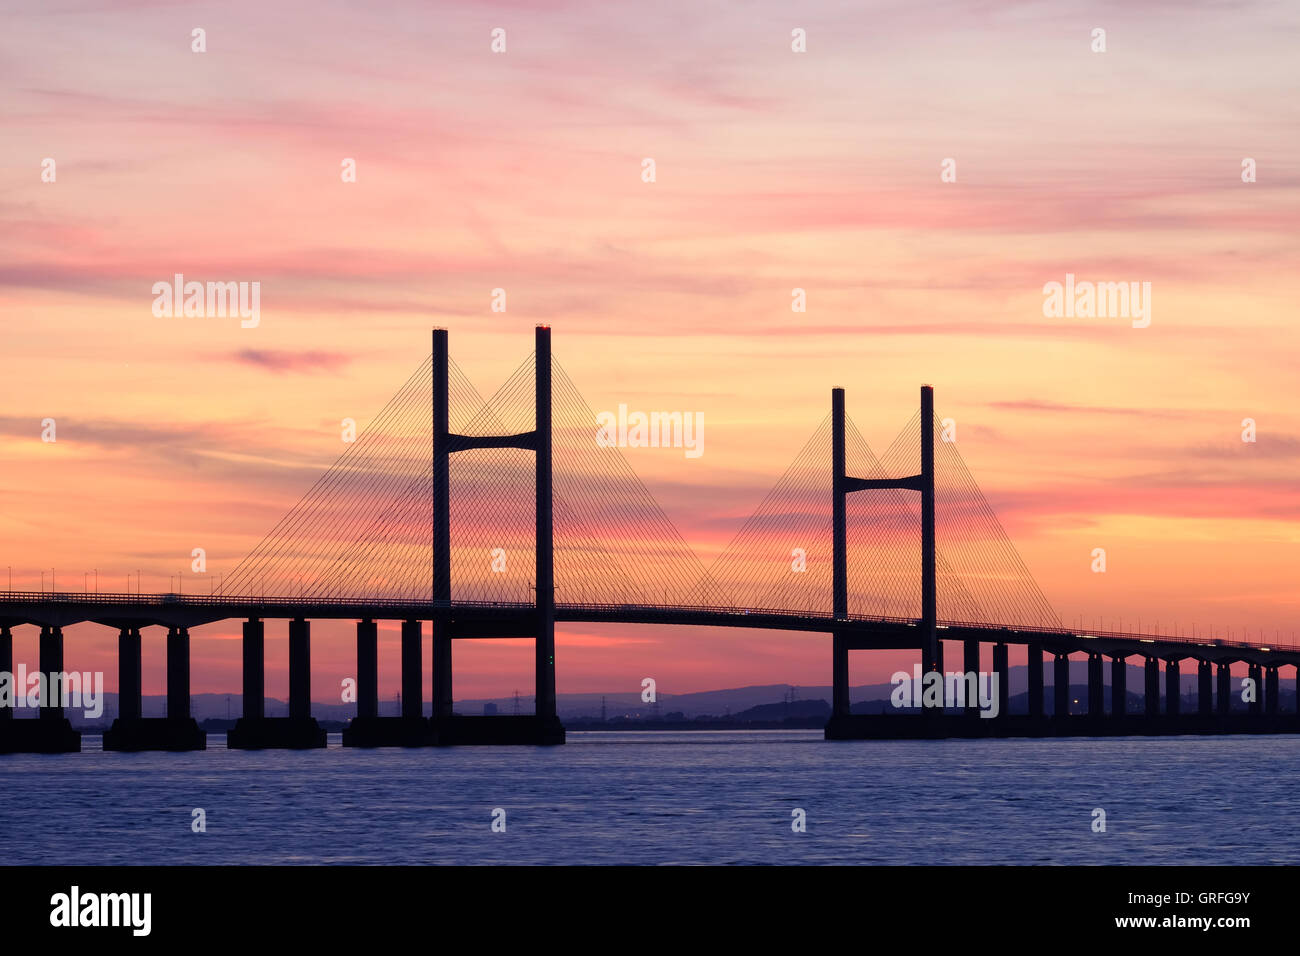 The Second Severn Crossing, a cable-stayed bridge built in 1995 to carry the M4 motorway across the Severn Estuary in the UK Stock Photo